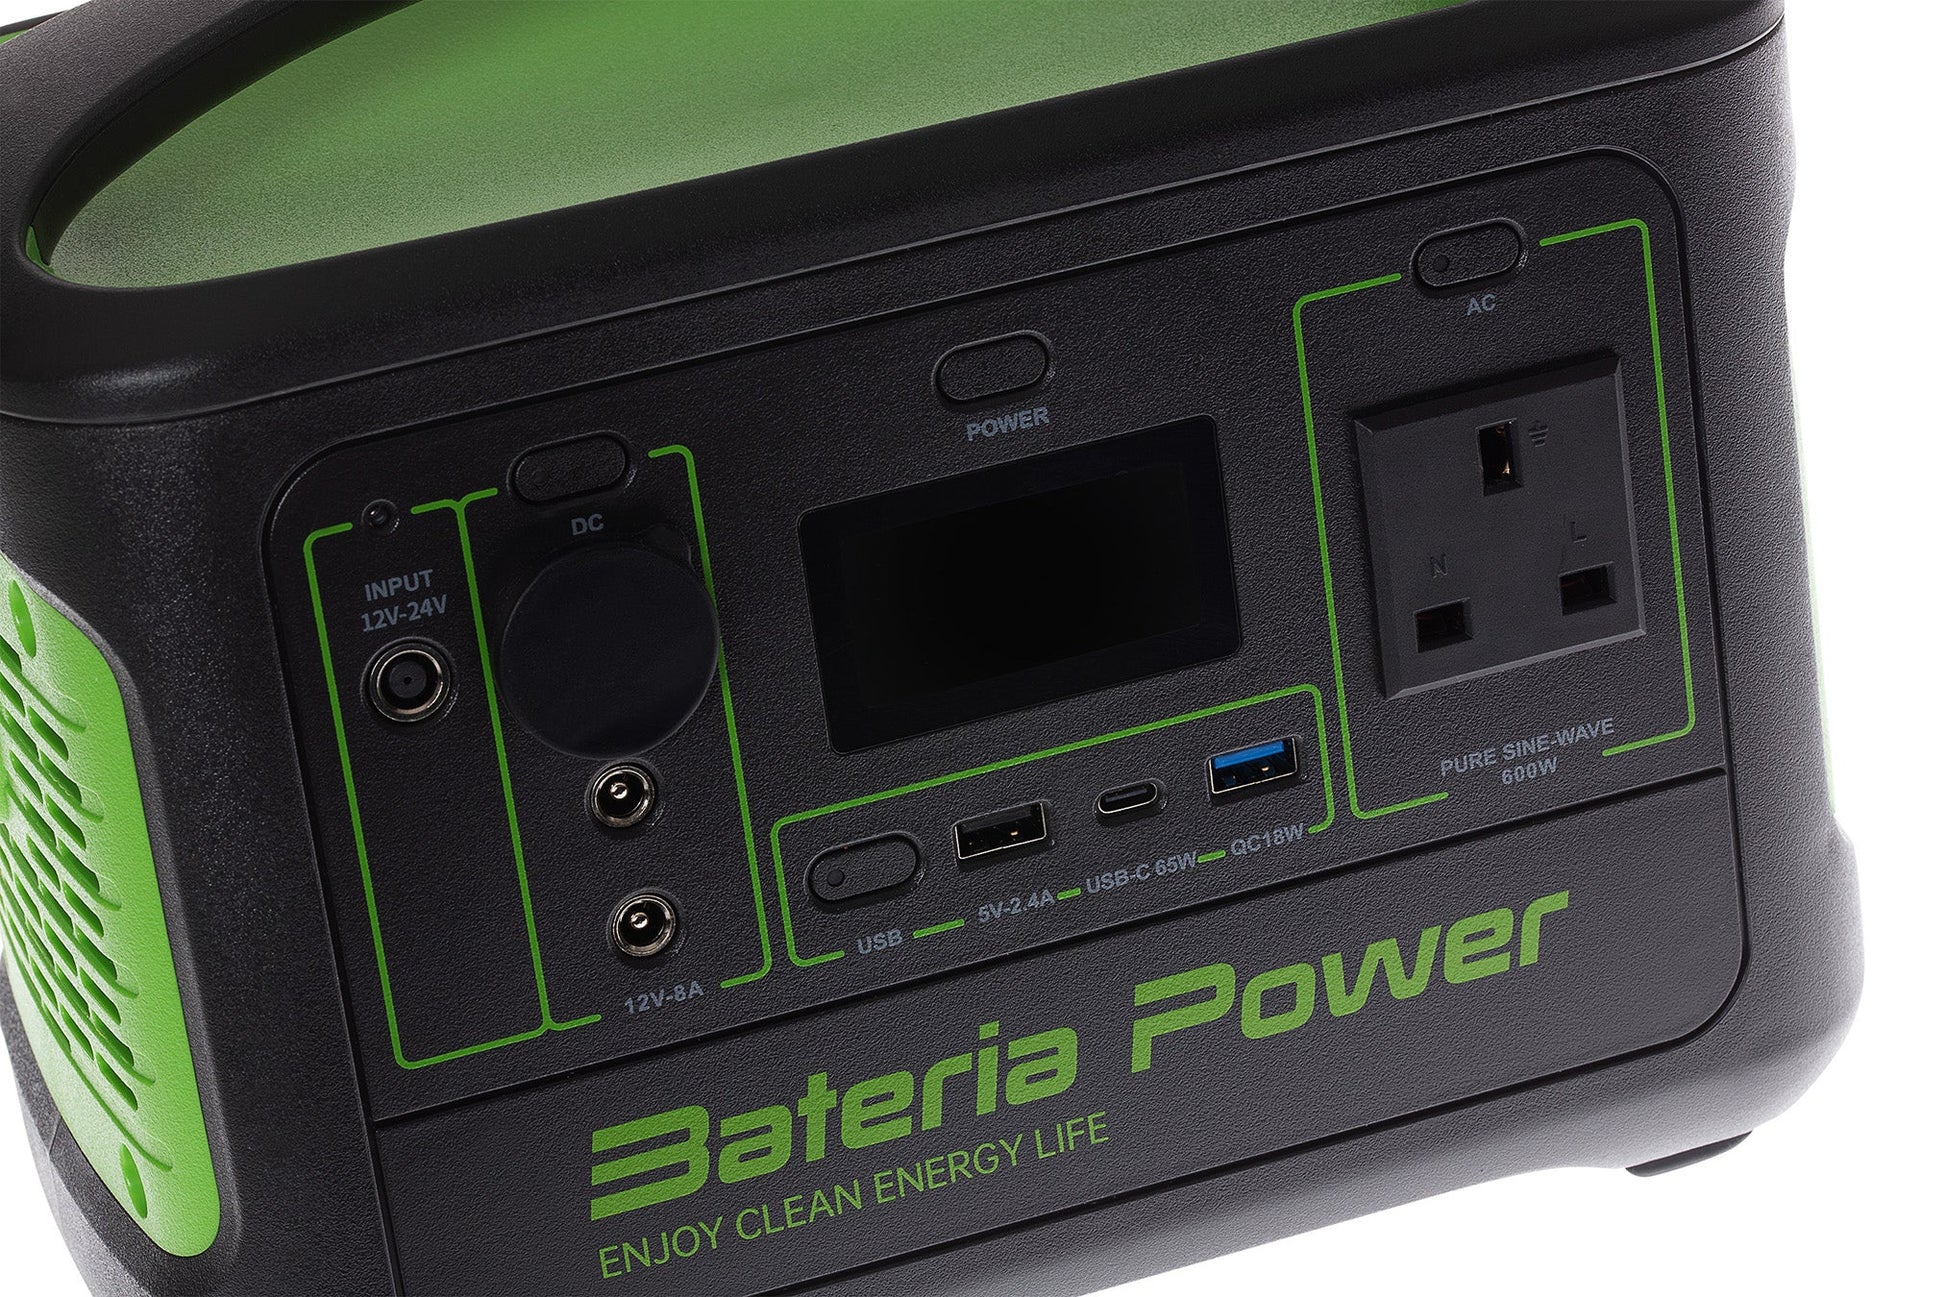 MPS Bateria 568Wh 600W AC/DC Output Rechargeable Portable Power Statio, Power & Solar, Maplin